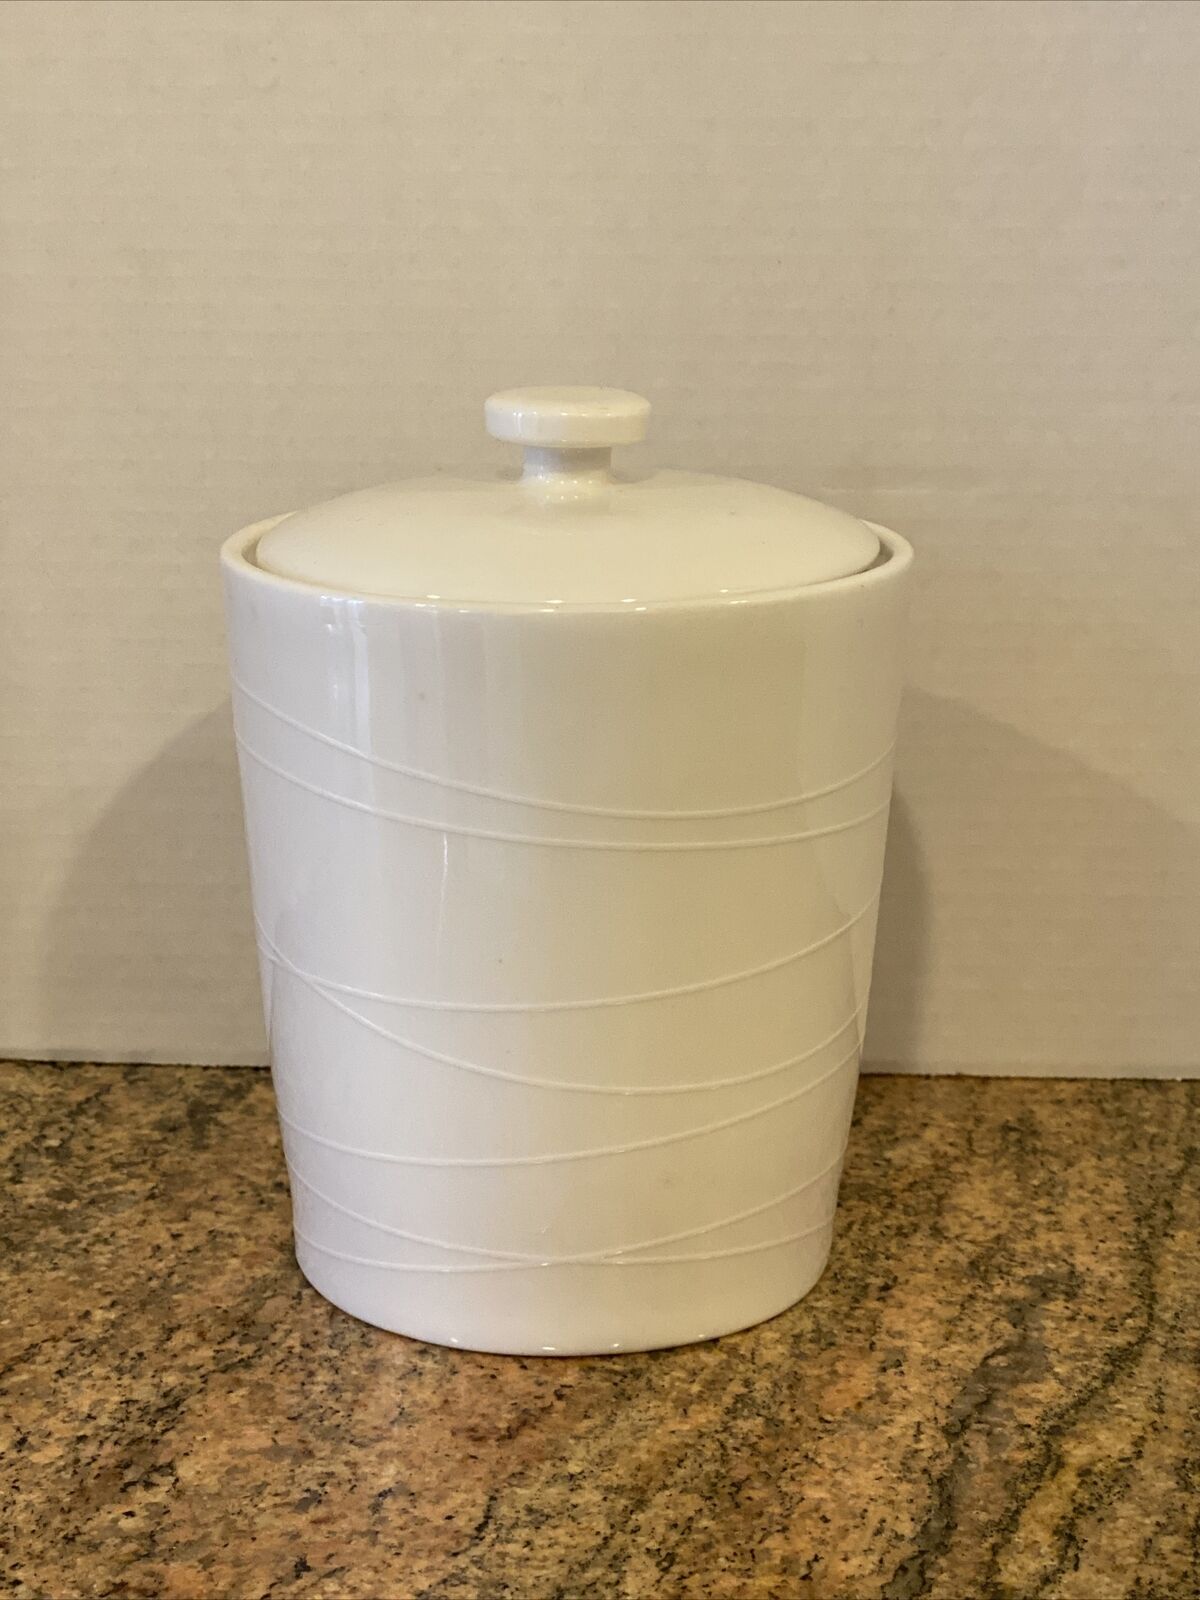 Starbucks 2004 Ivory Canister At Home Collection with Raised Line Pattern EUC